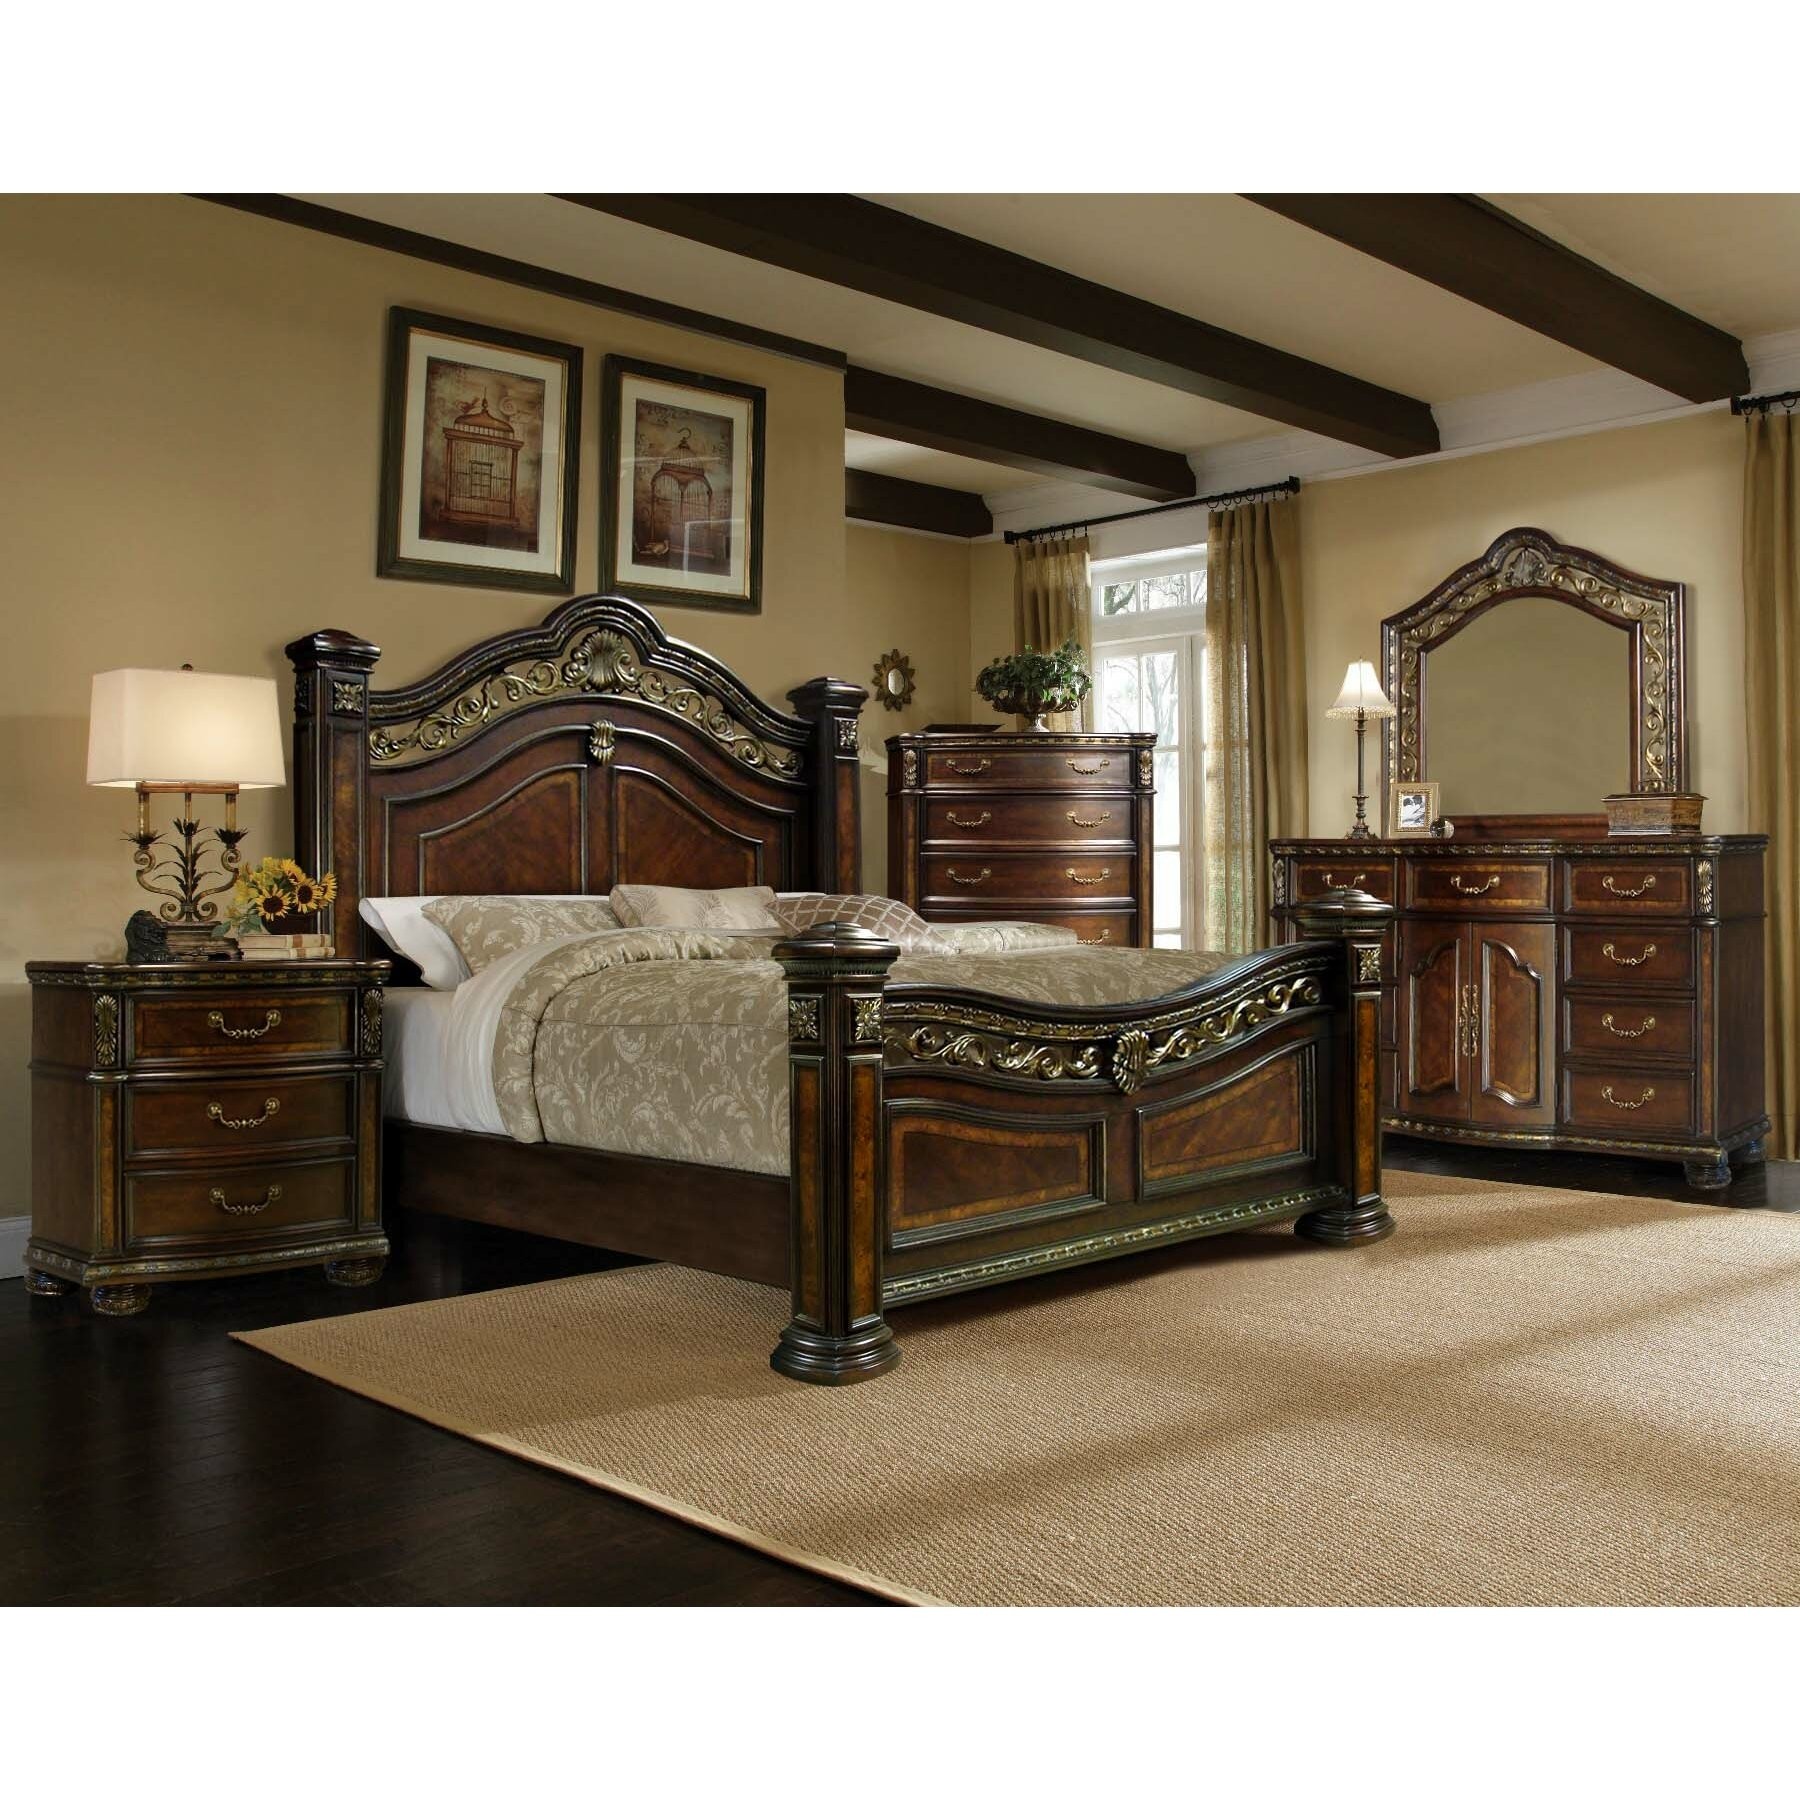 Ultimate accents old world 5 pc bedroom set